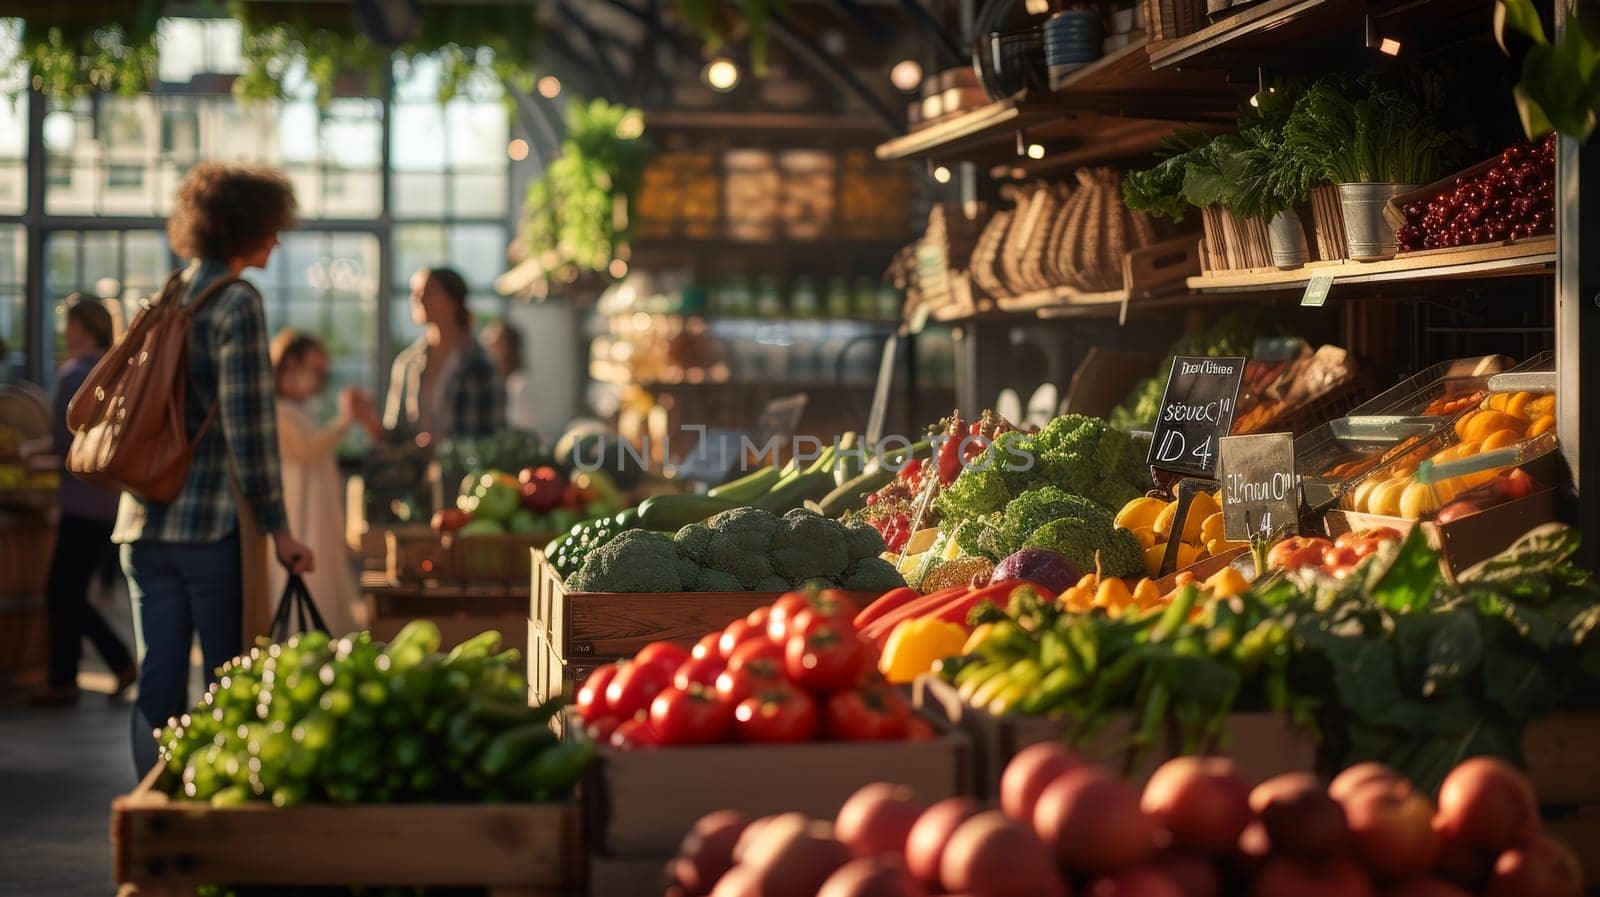 This image showcases a bustling outdoor market under a pergola, where vendors and shoppers engage amidst a fresh, locally-sourced selection of produce.